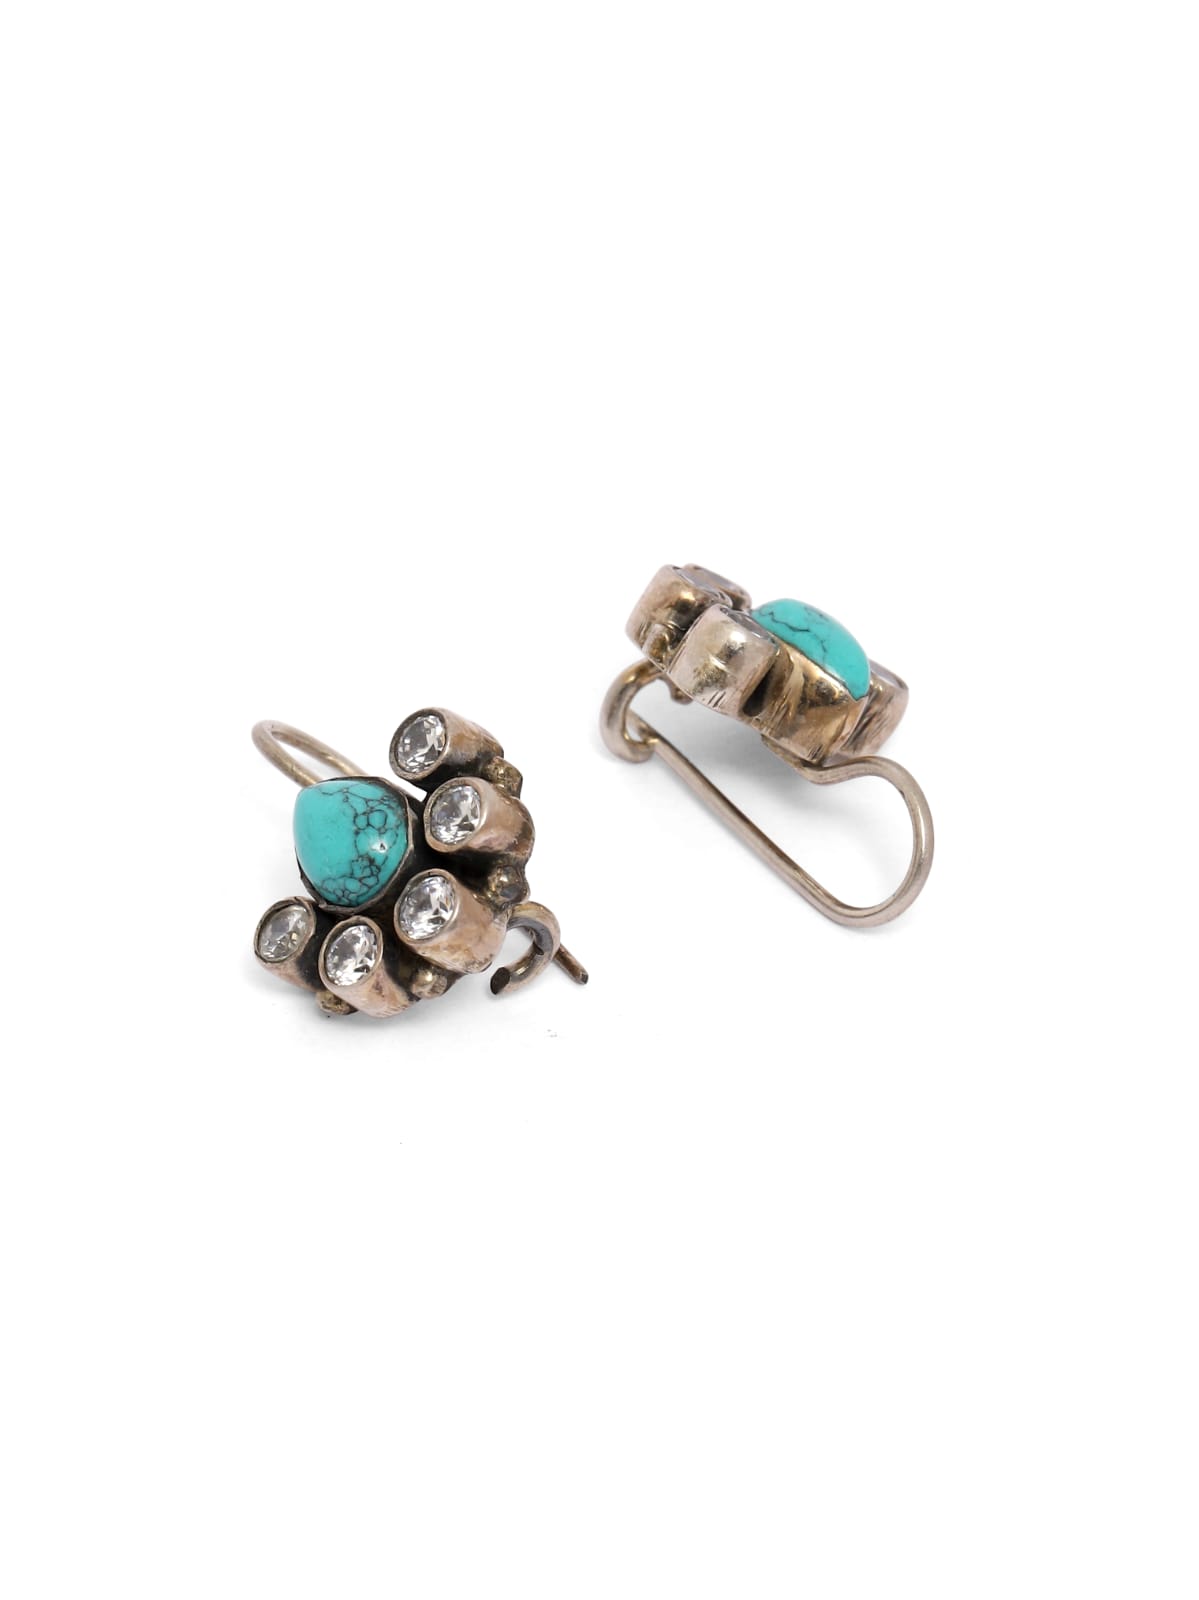 Sterling Silver earrings with Cubic Zirconia and Turquoise.